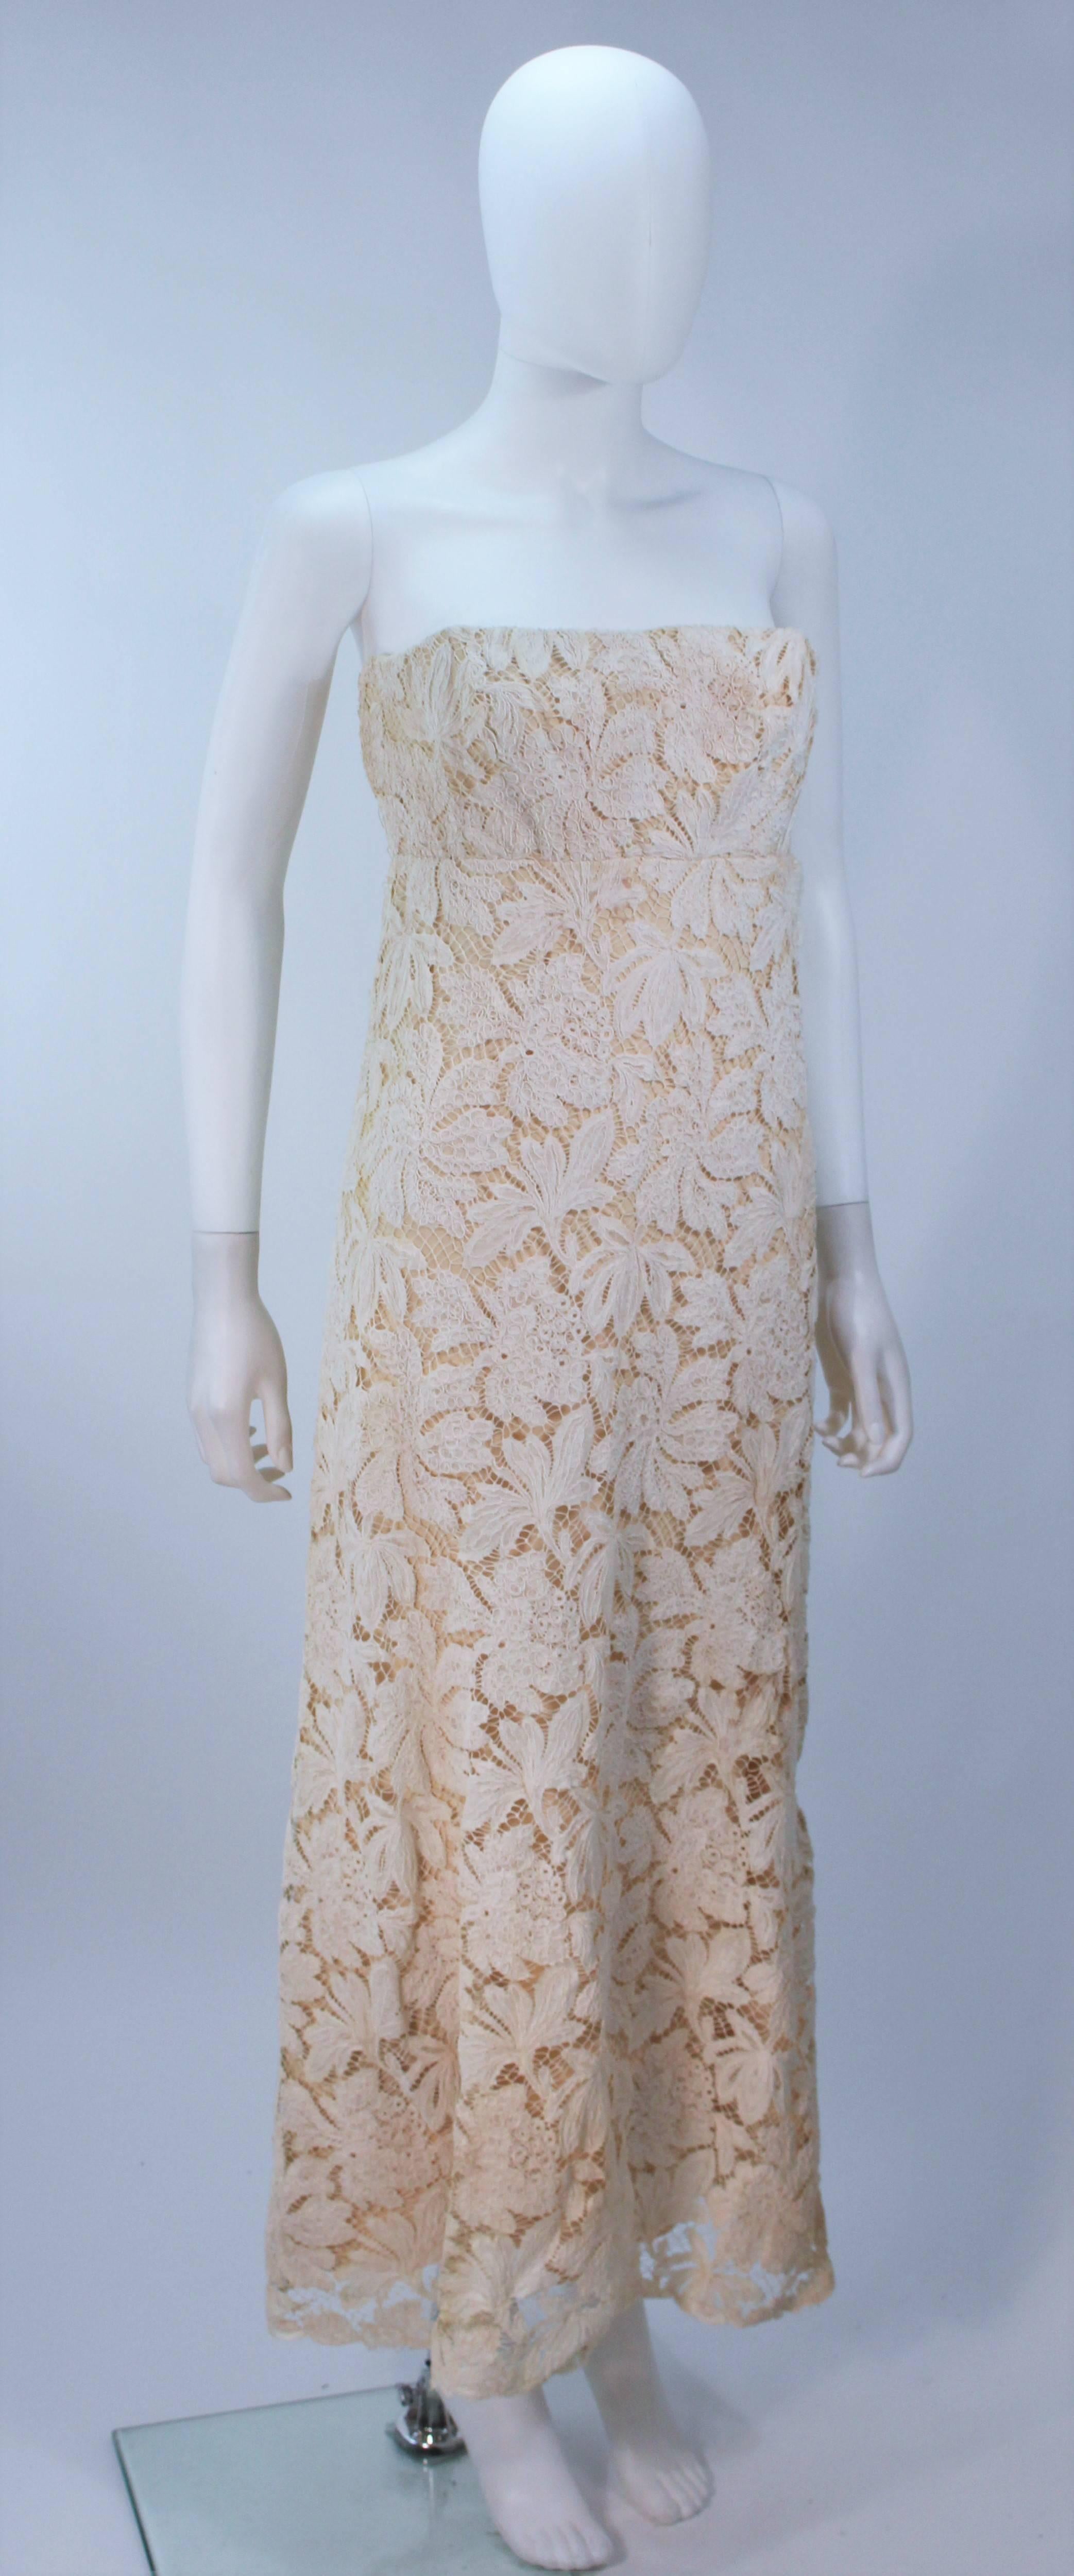 GALANOS Antique Cream Floral Strapless Lace Cocktail Dress Size 2-4 In Excellent Condition For Sale In Los Angeles, CA